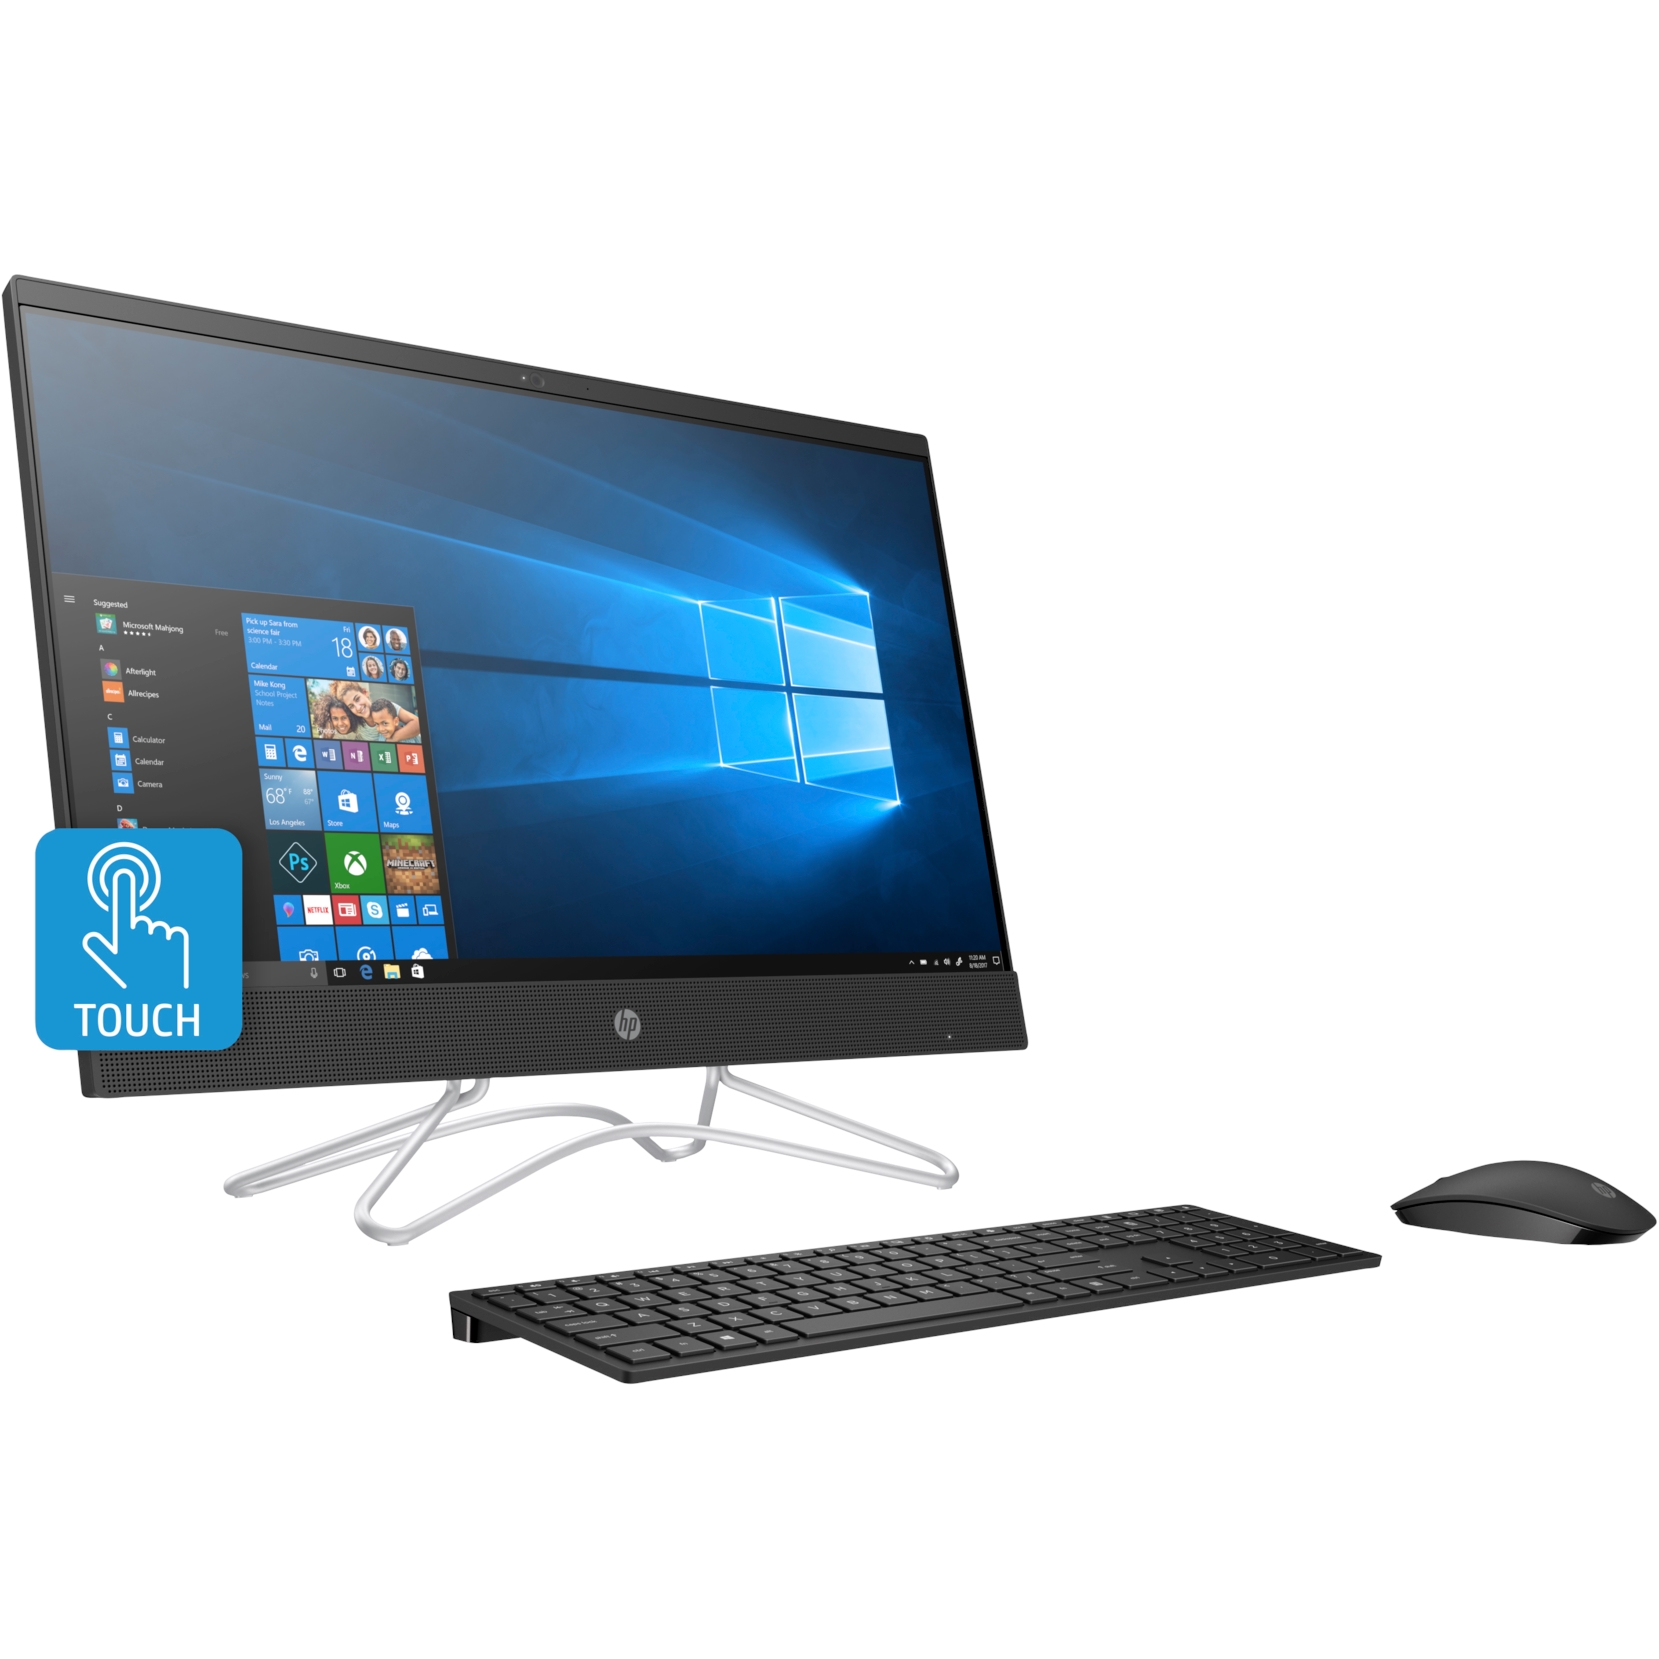 HP 24-F0044NT 8UF45EA i5-9400 8GB 128SSD+1TB 2GB MX110 23.8" FHD DOKUNMATİK FREDOOS SIYAH ALL IN ONE PC